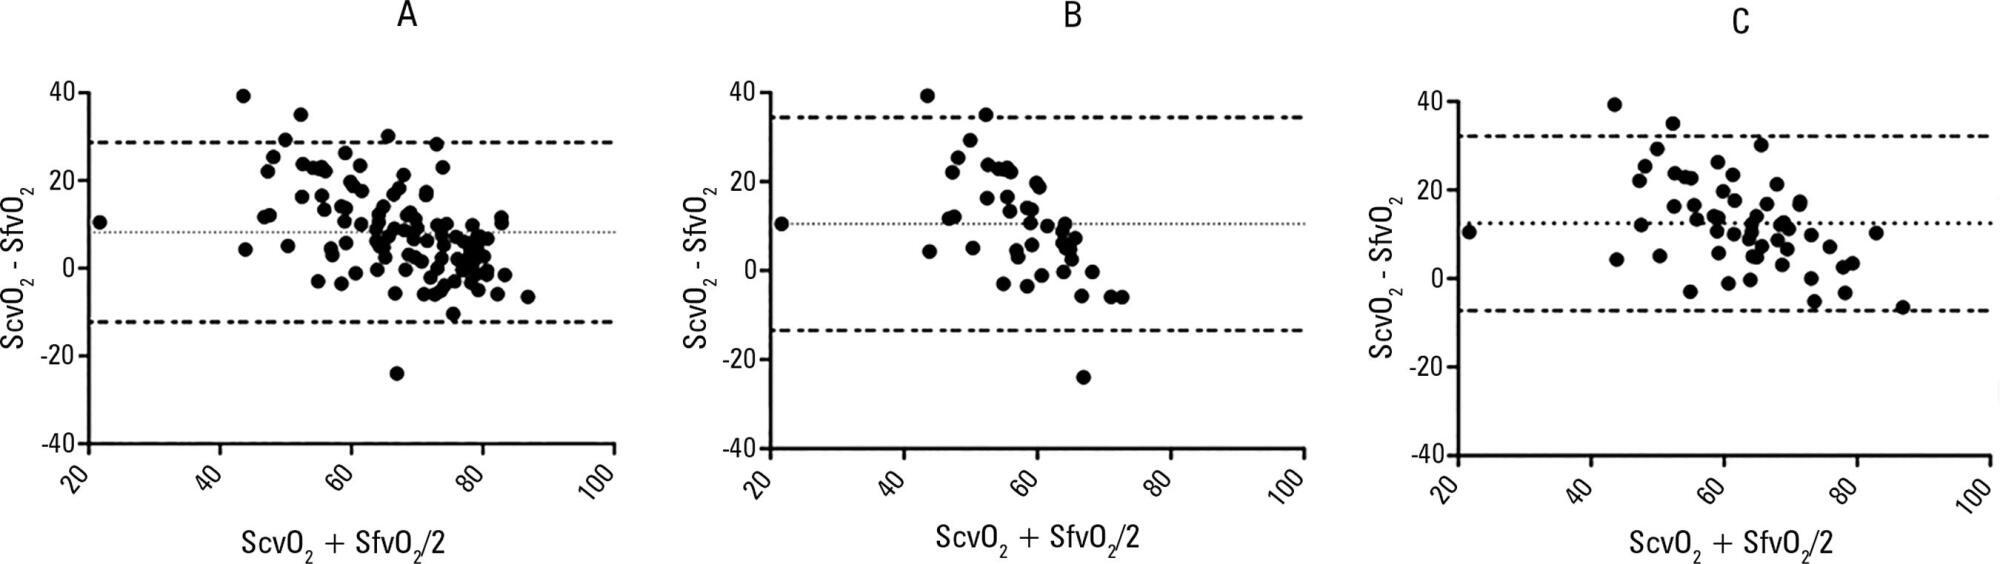 Is venous blood drawn from femoral access adequate to estimate the central venous oxygen saturation and arterial lactate levels in critically ill patients?